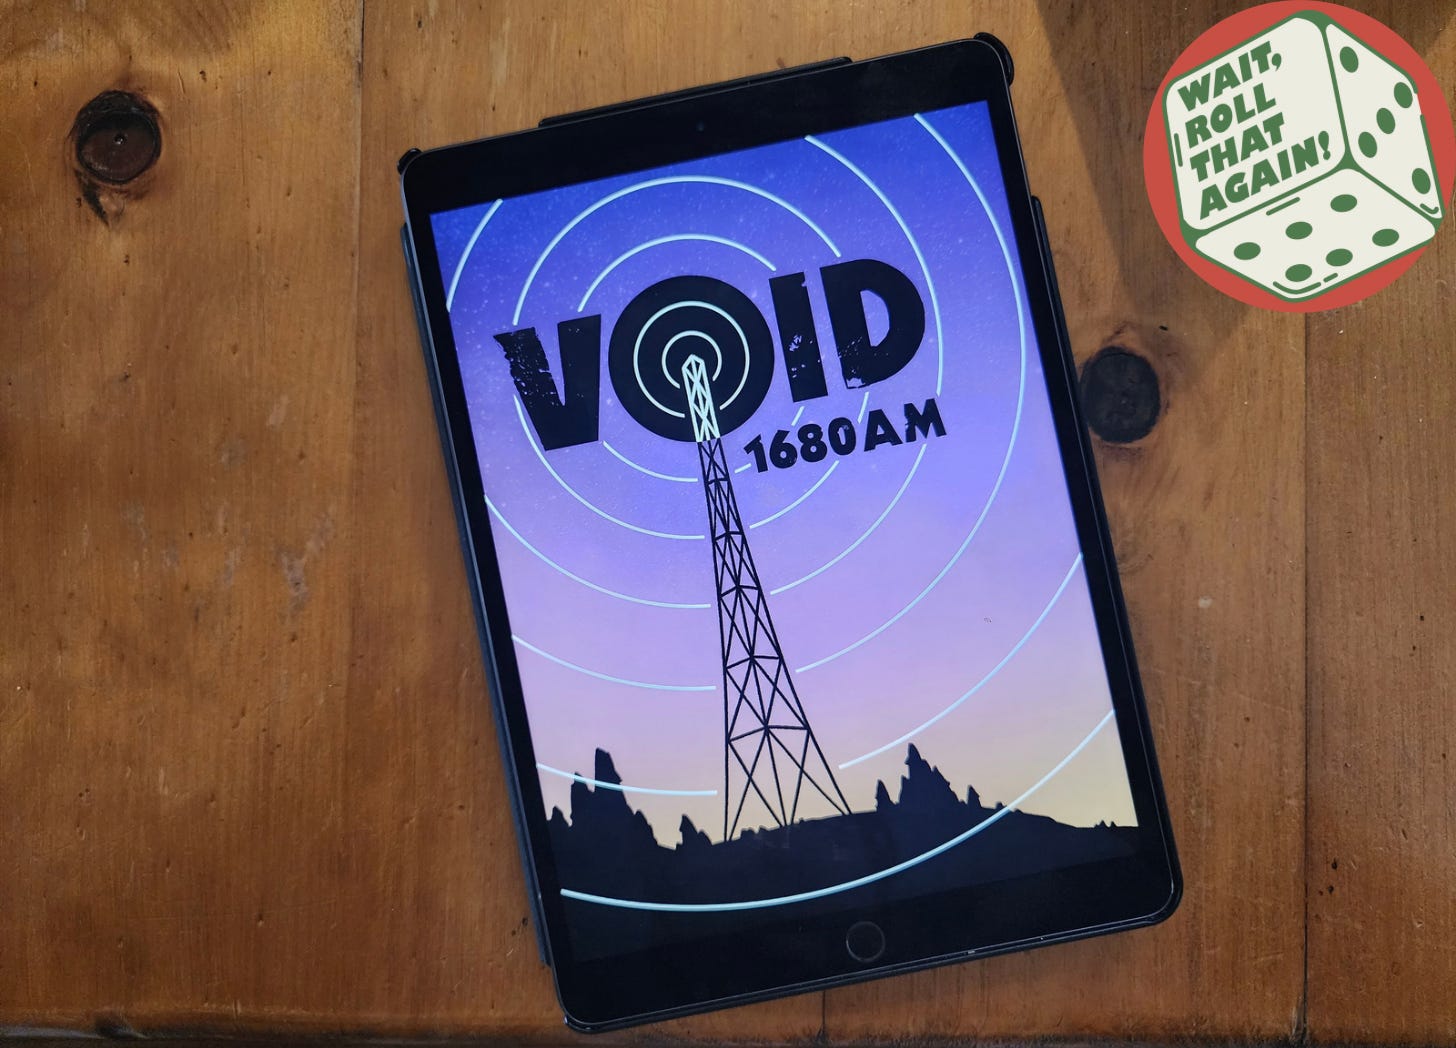 An iPad on a wooden table displays the cover of VOID 1680 AM, with a towering Radio Broadcast tower over a sunset background